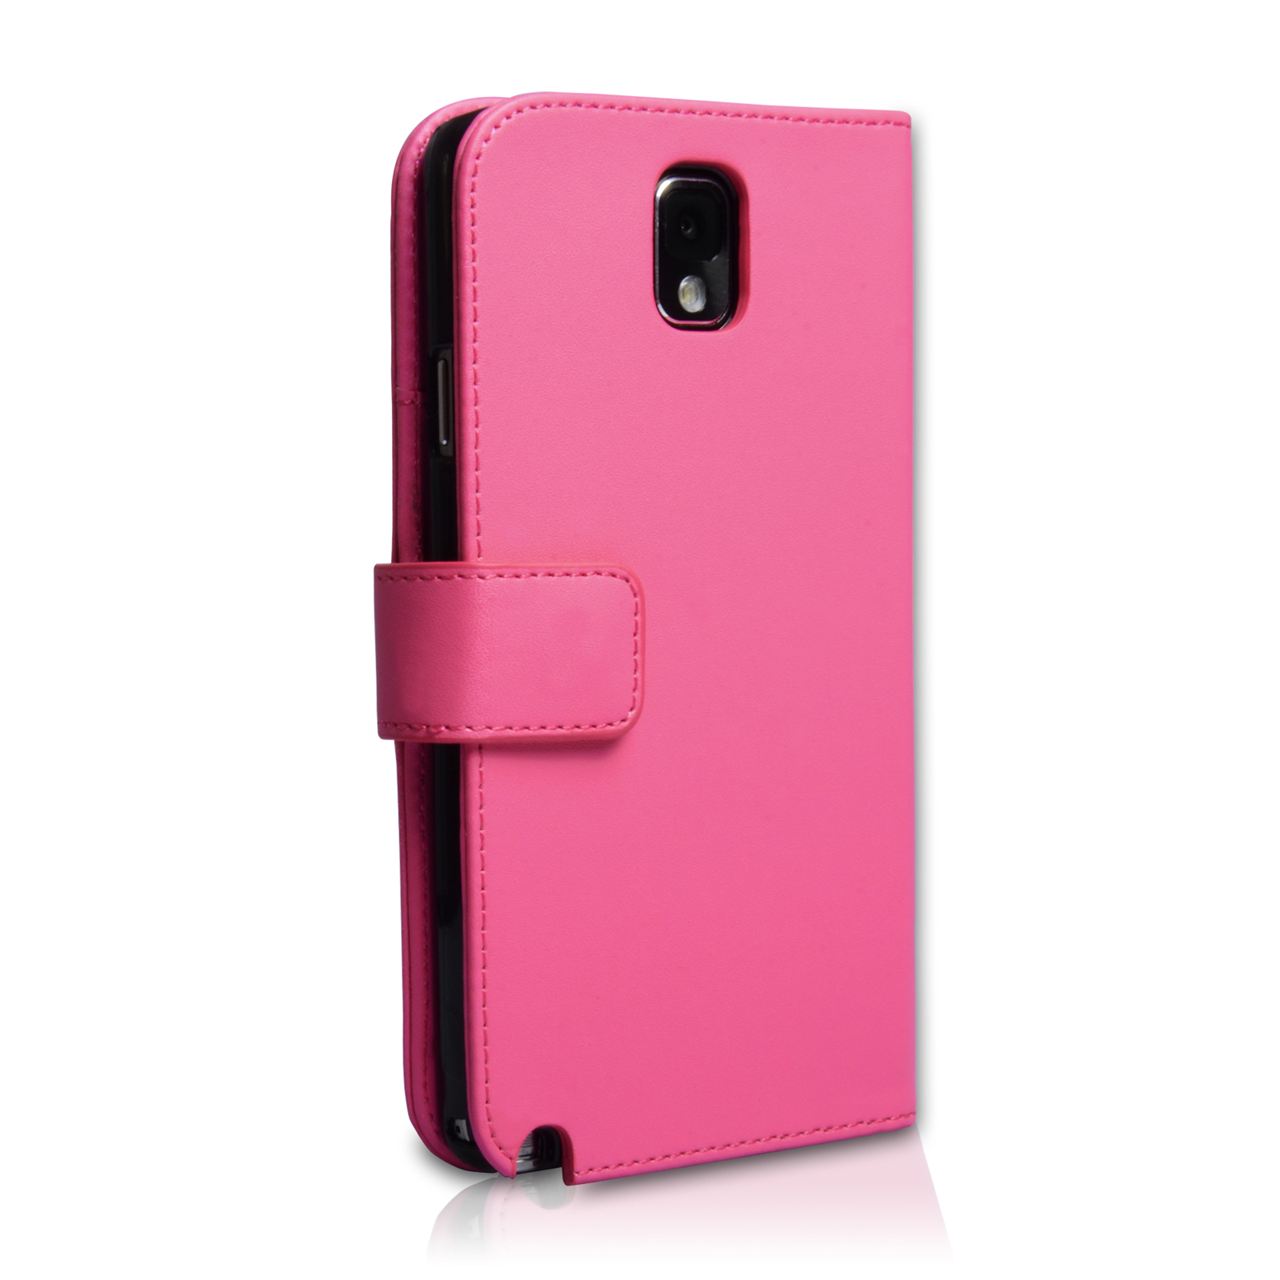 YouSave Samsung Galaxy Note 3 Leather Effect Wallet Case - Hot Pink